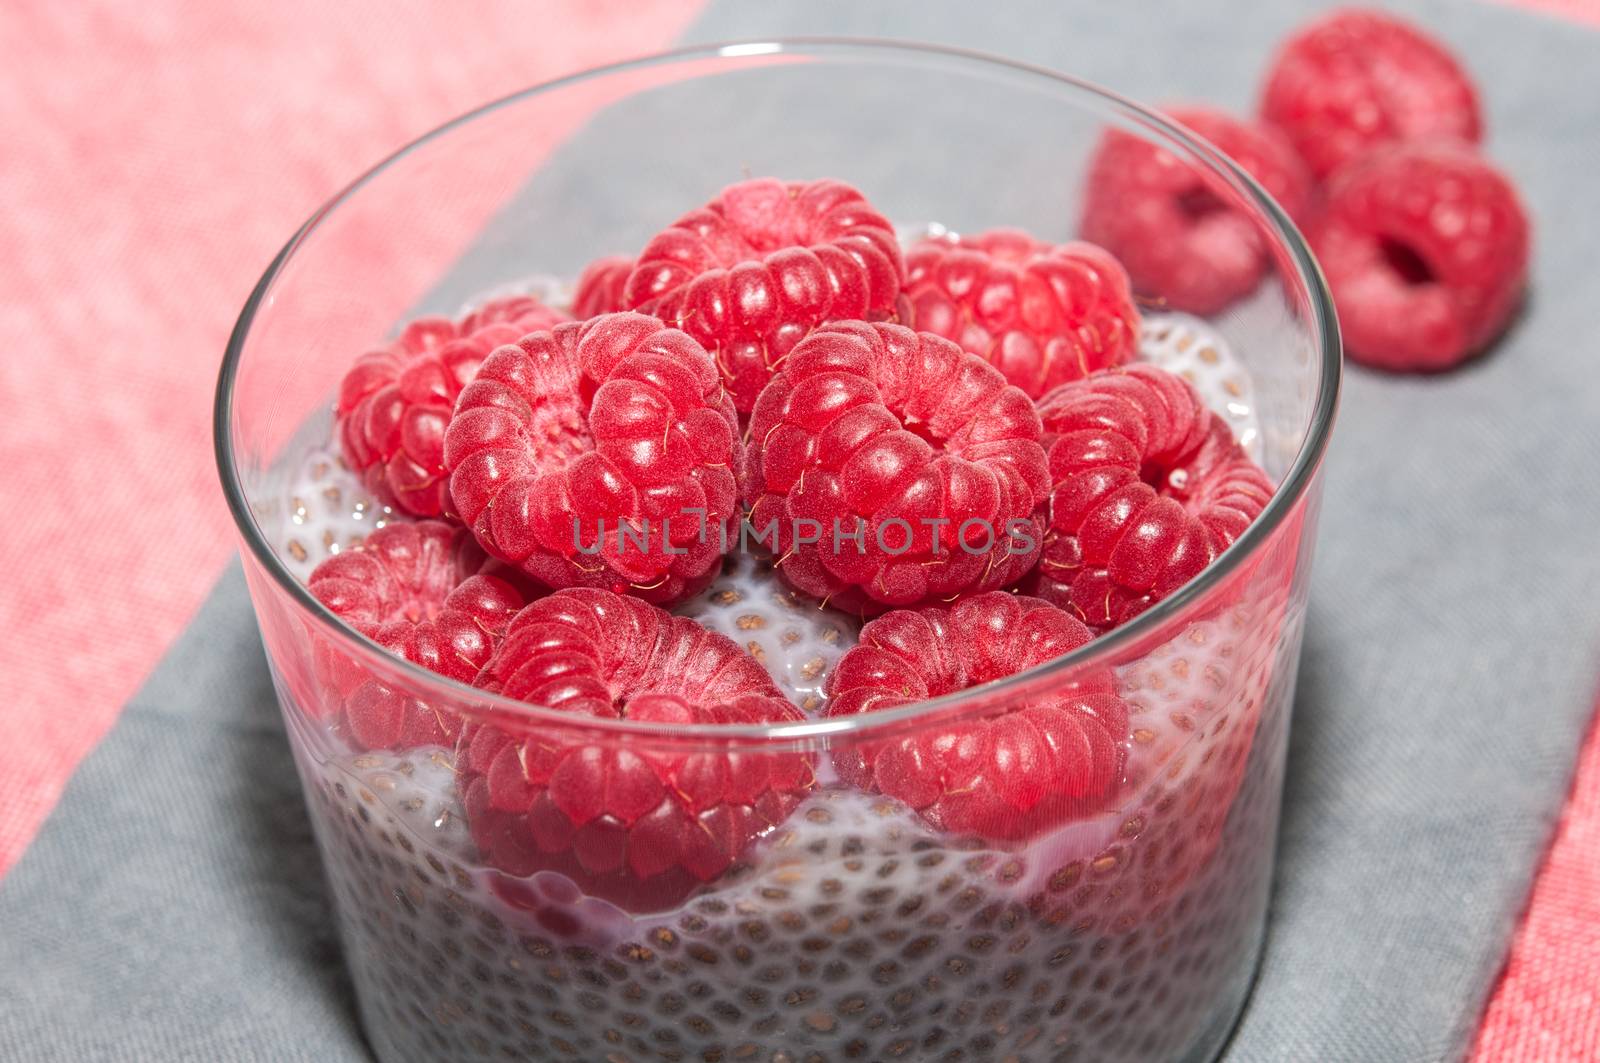 Pudding raspberries and chia seeds on a tablecloth